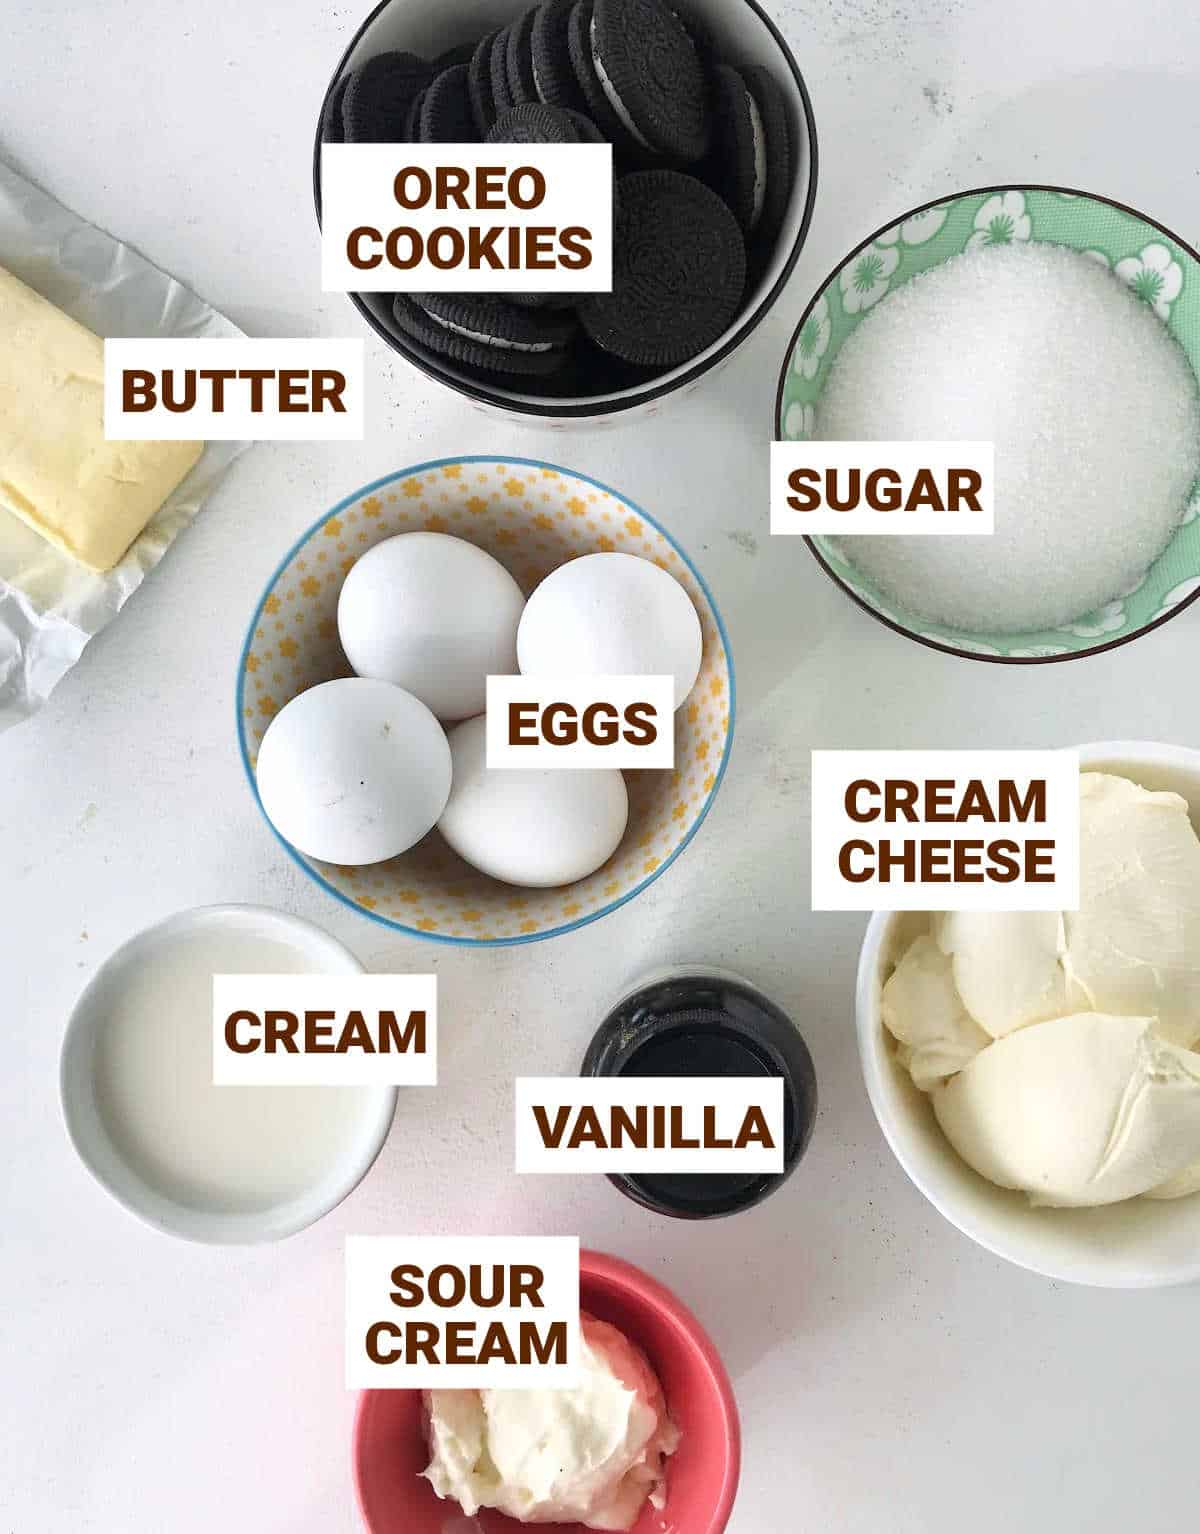 White surface with colorful bowl containing Oreo cheesecake ingredients such as eggs, cream cheese and butter.